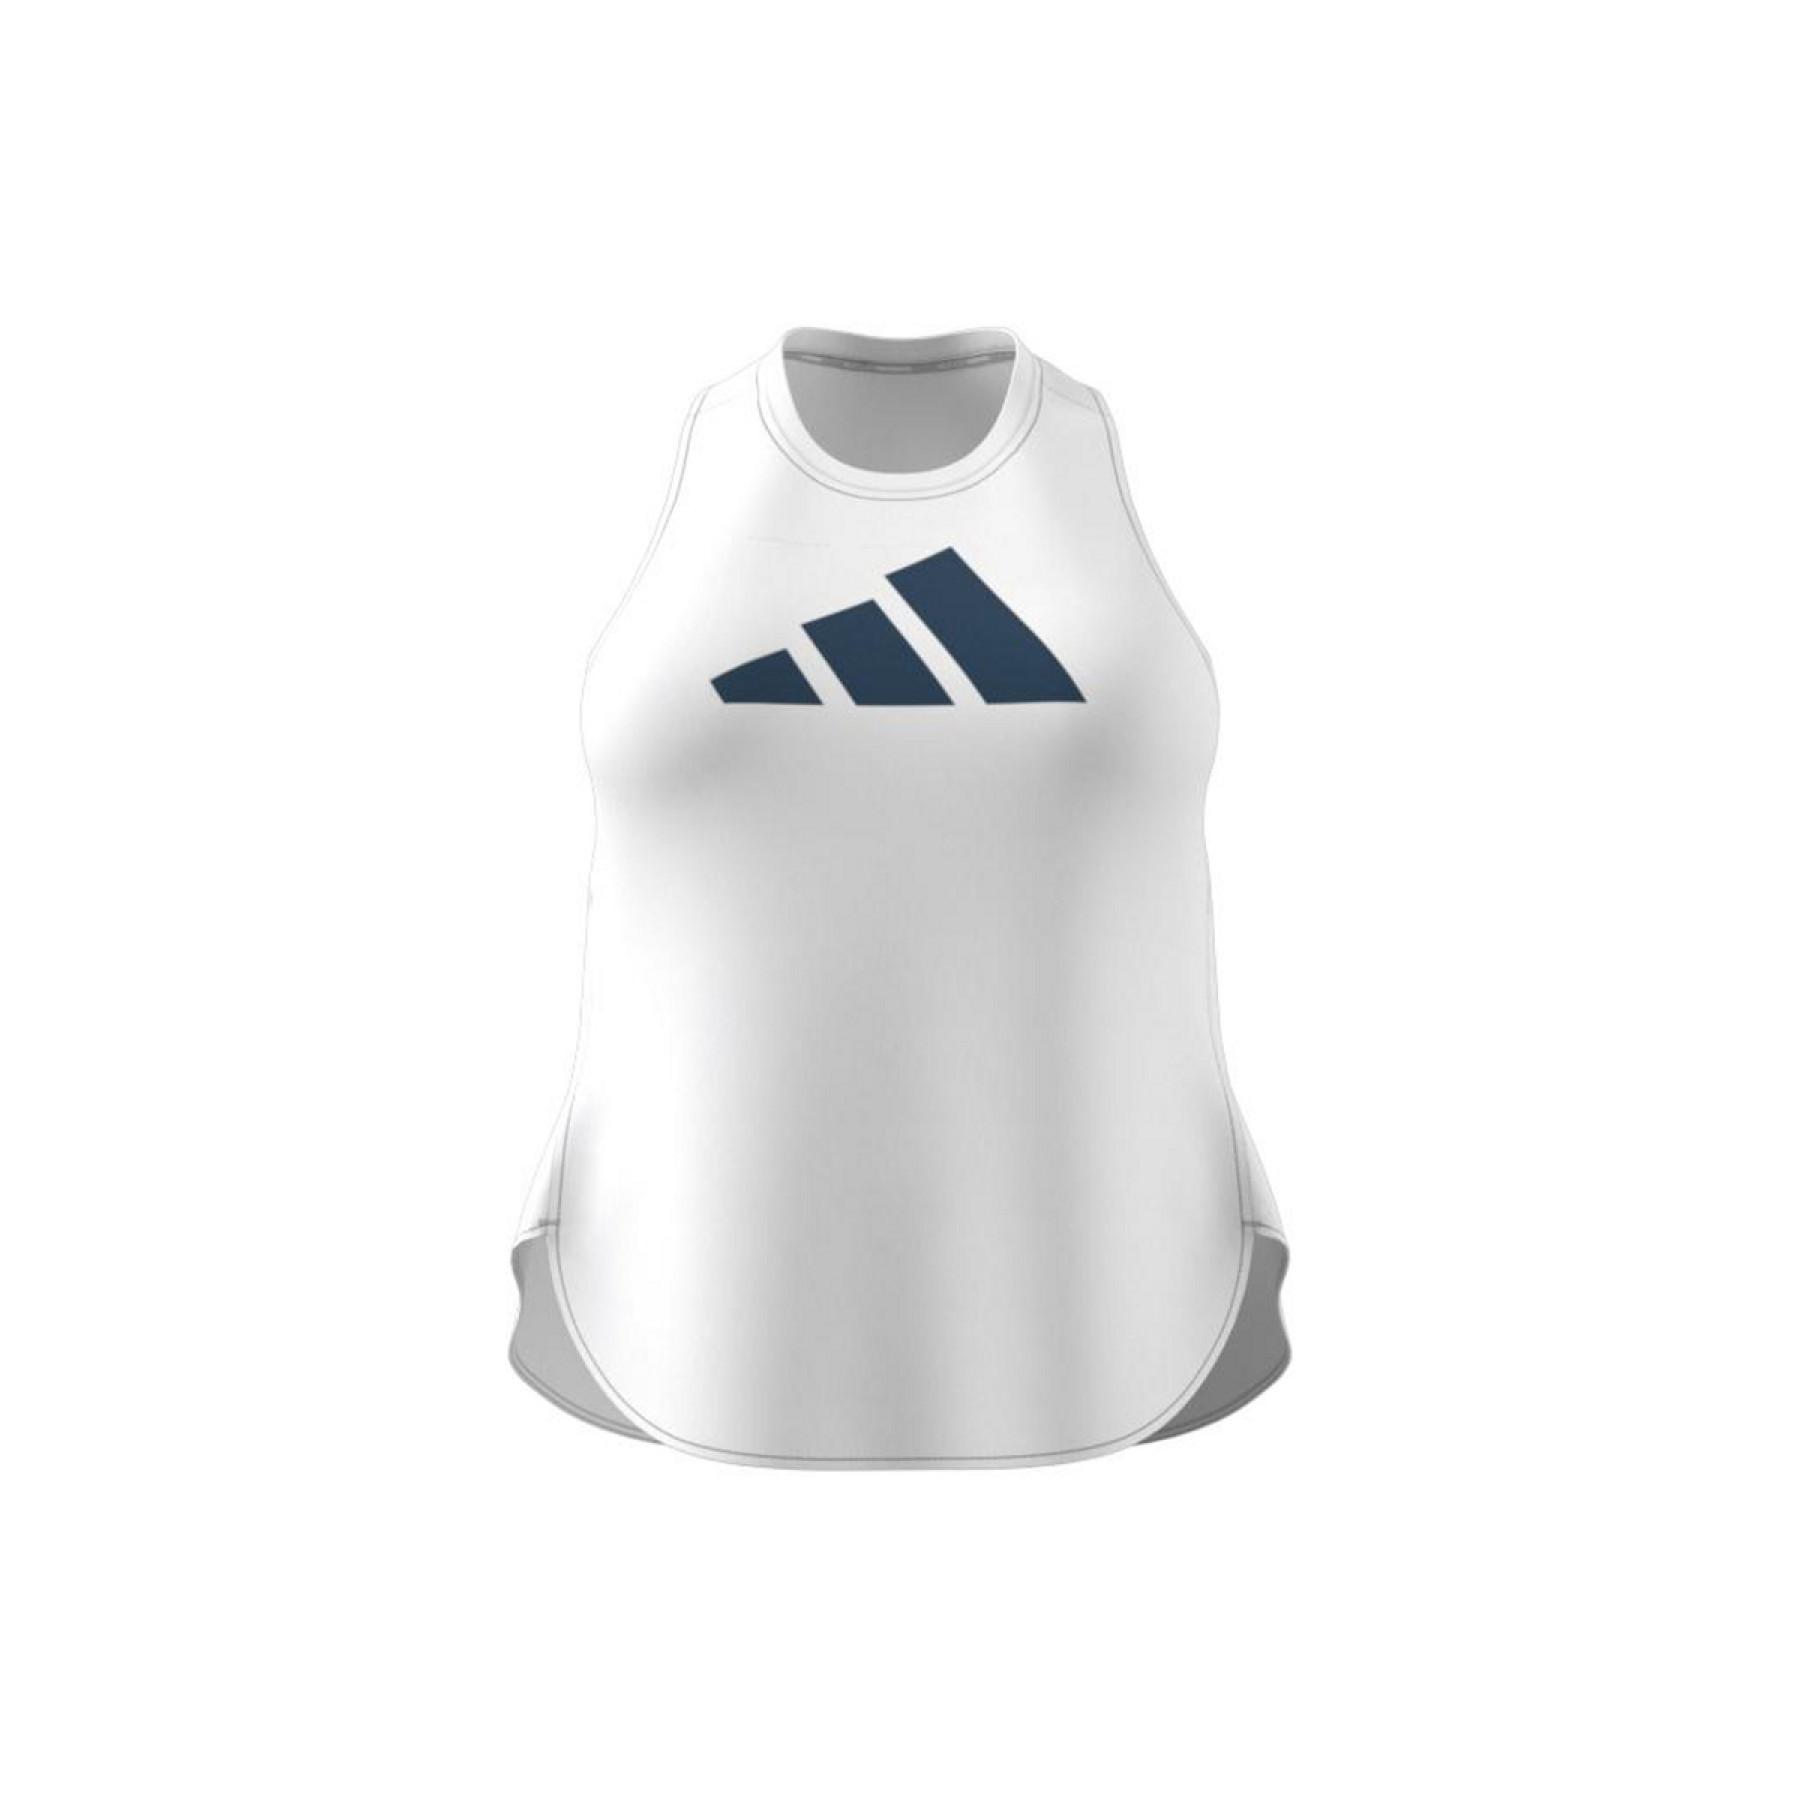 Maillot femme adidas Badge of Sport Grande Taille